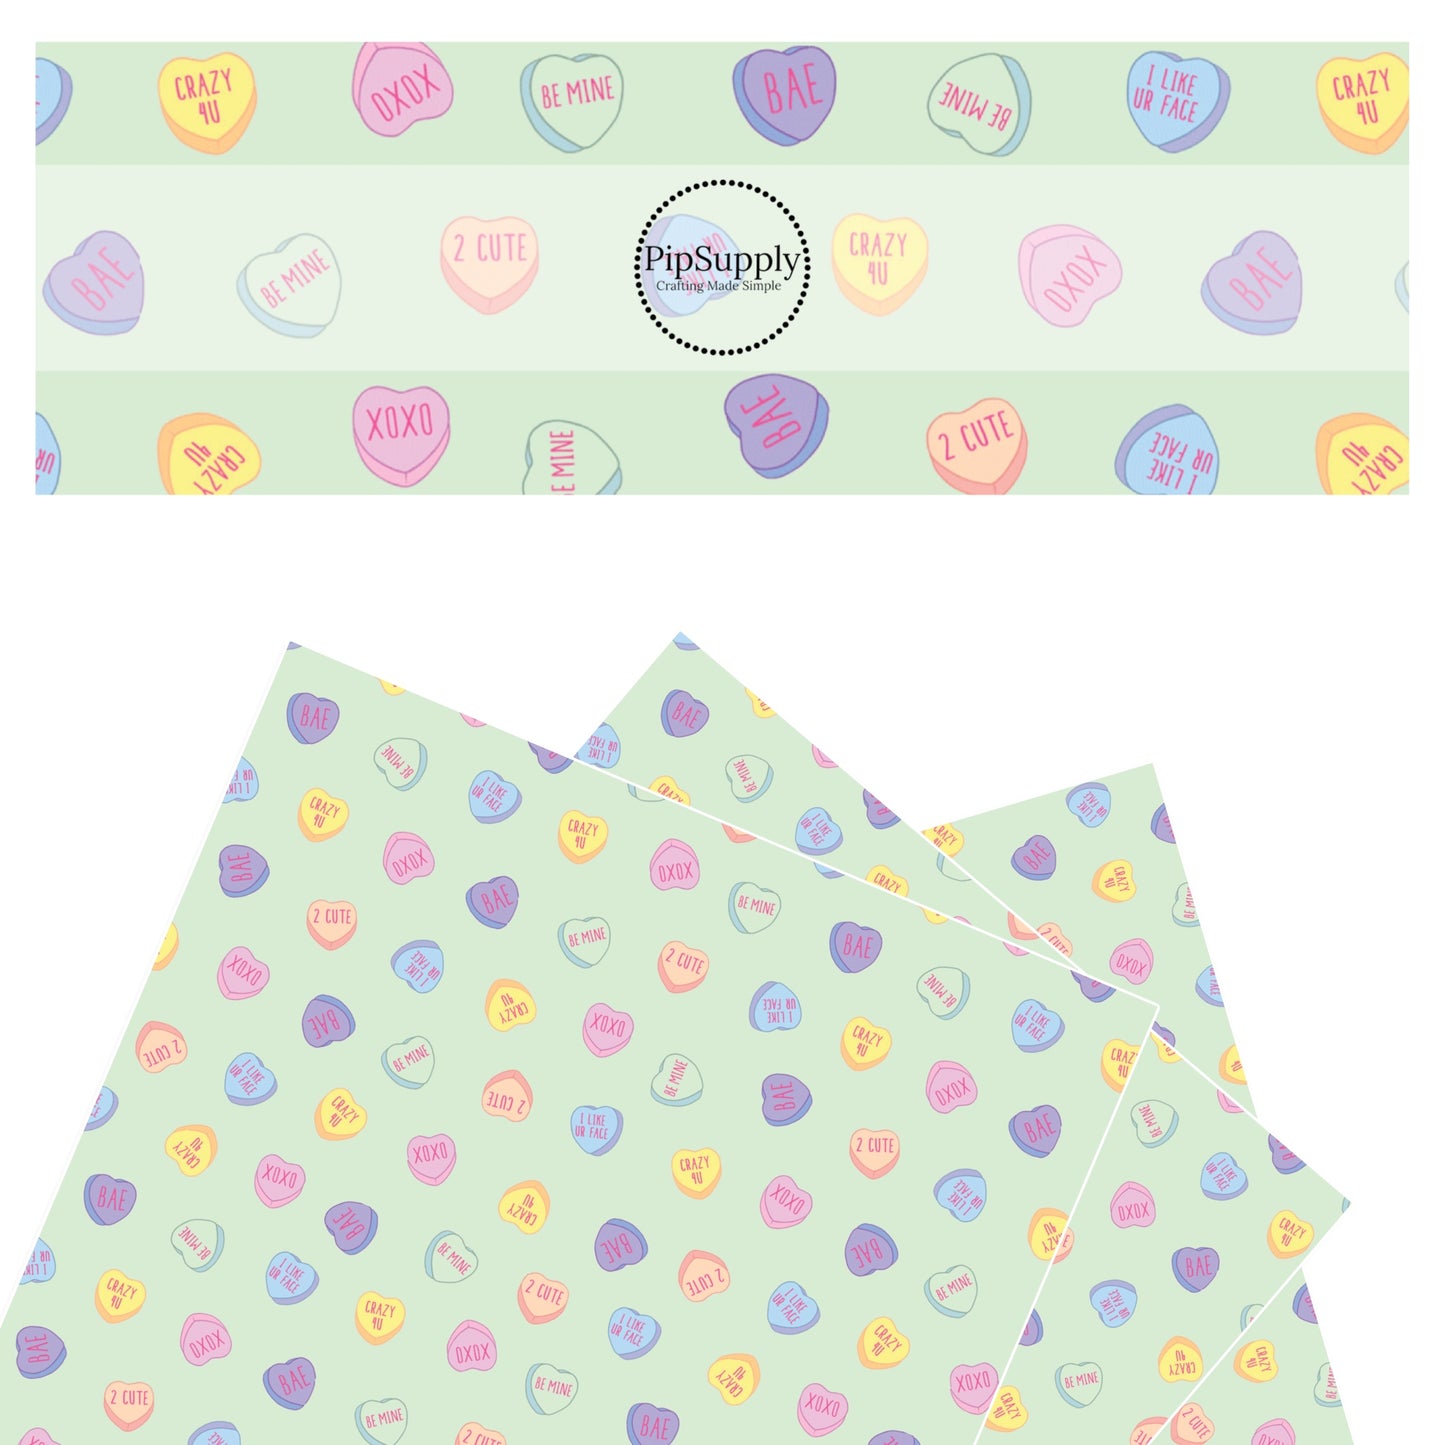 Purple, blue, yellow, orange, and pink hearts with words on a mint faux leather sheet